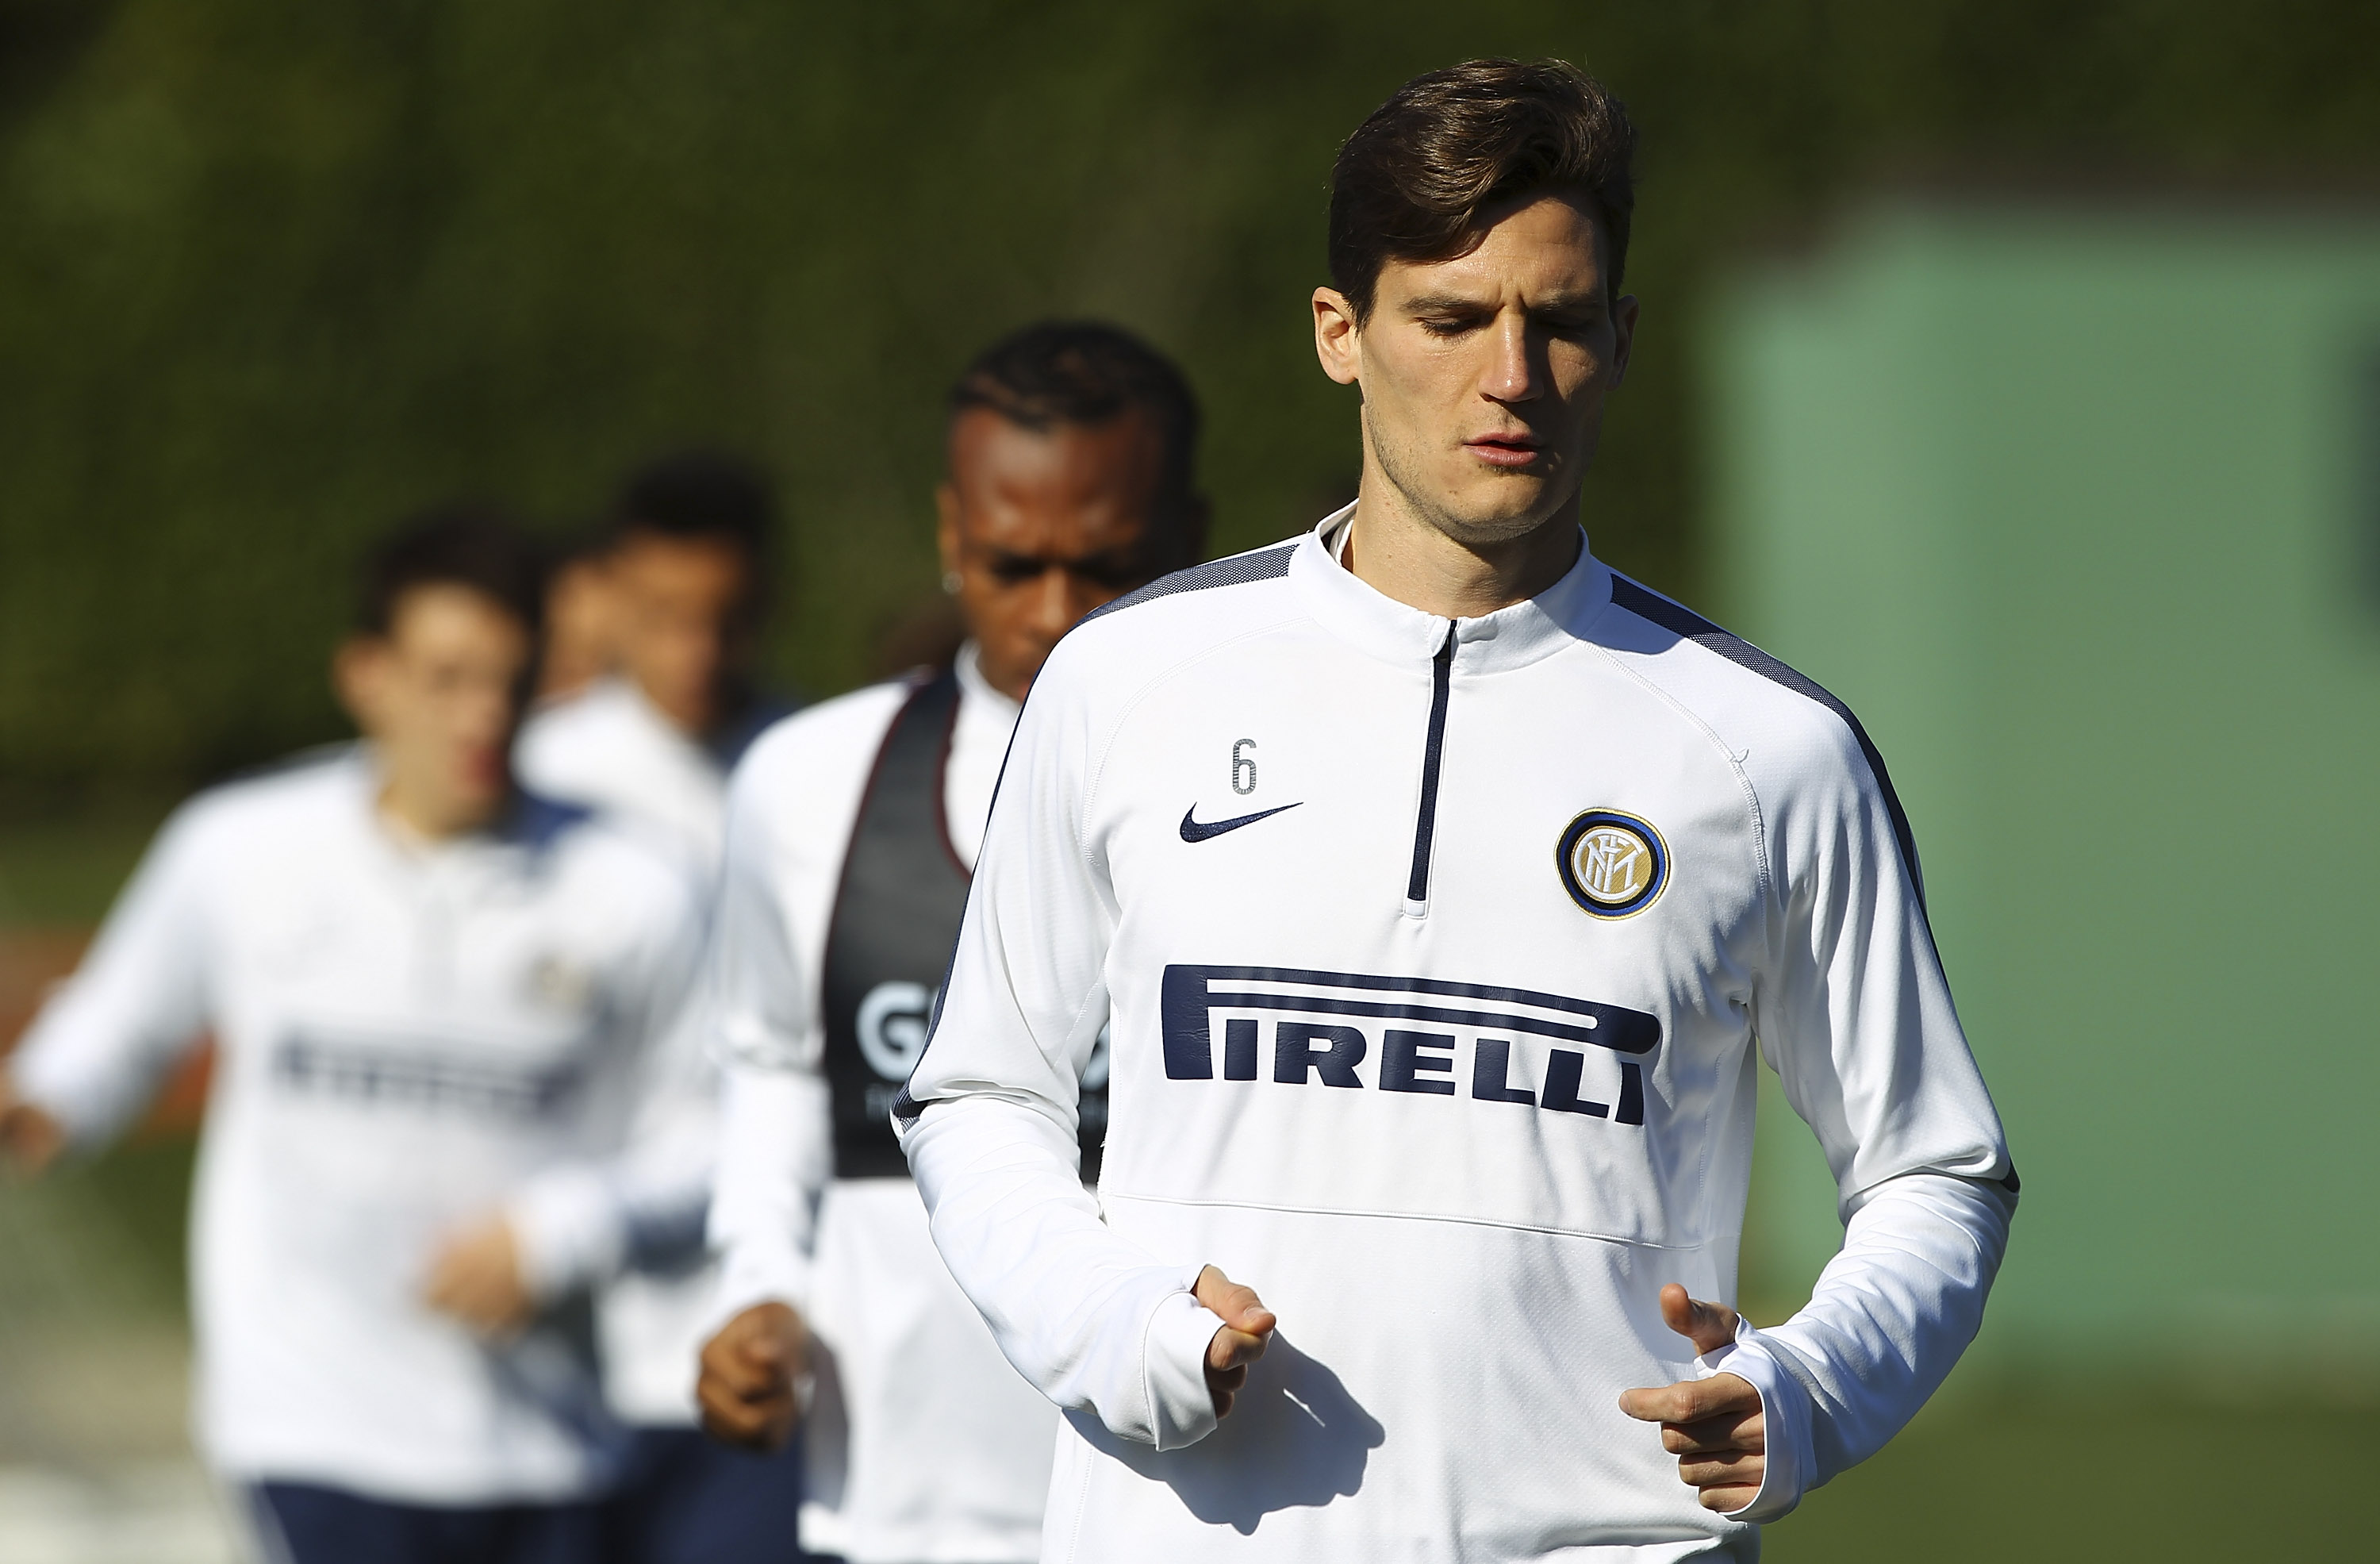 Ex-Inter Defender Marco Andreolli: “Three Huge Points Against Juventus, Vital For The Season”